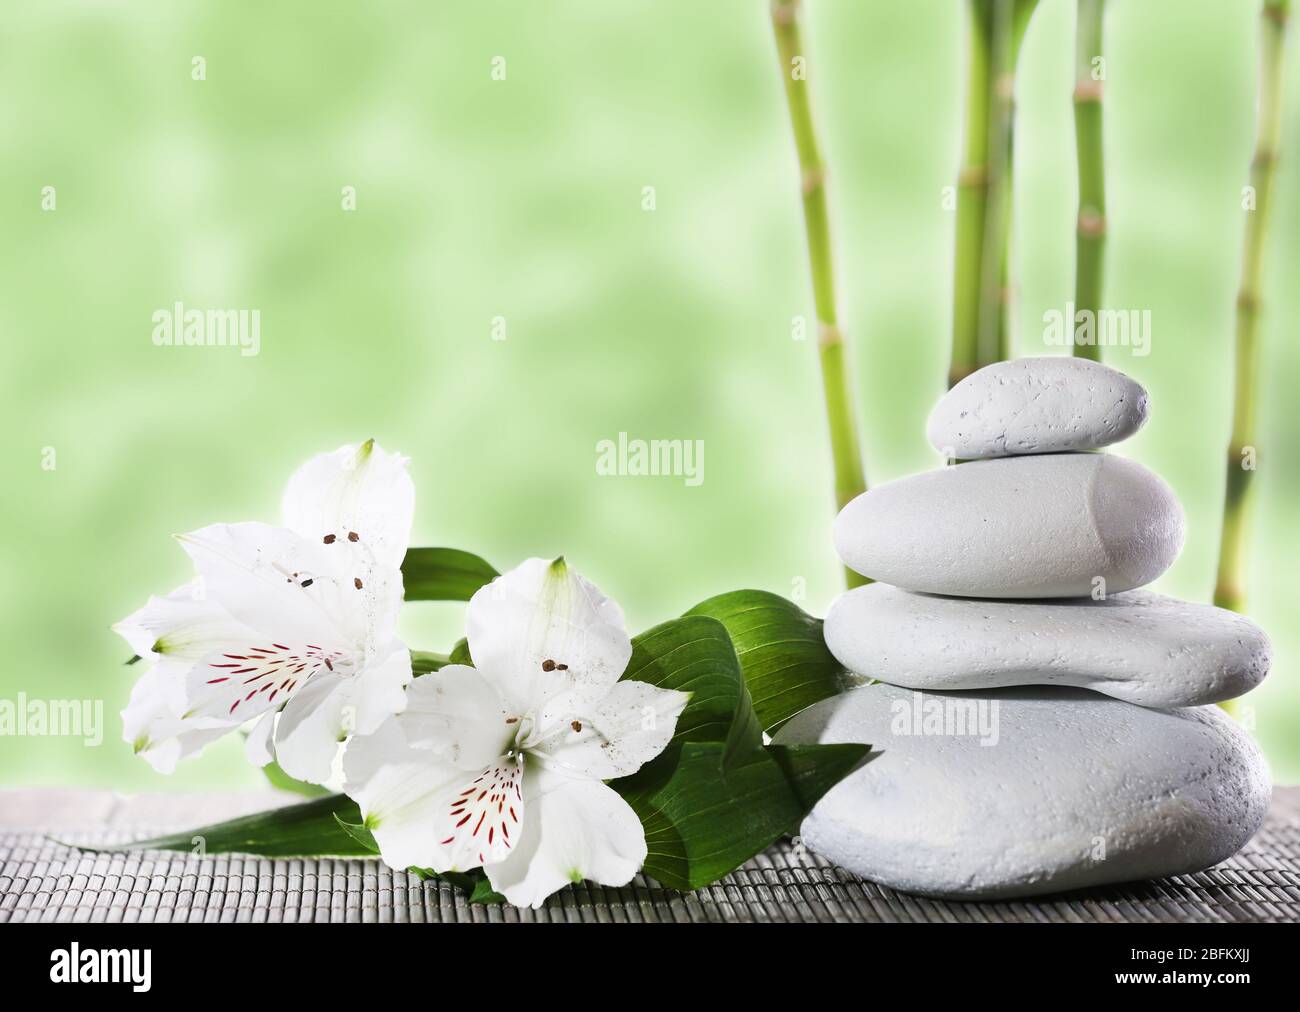 Still life of spa stones on bamboo mat surface with bamboo sticks Stock Photo